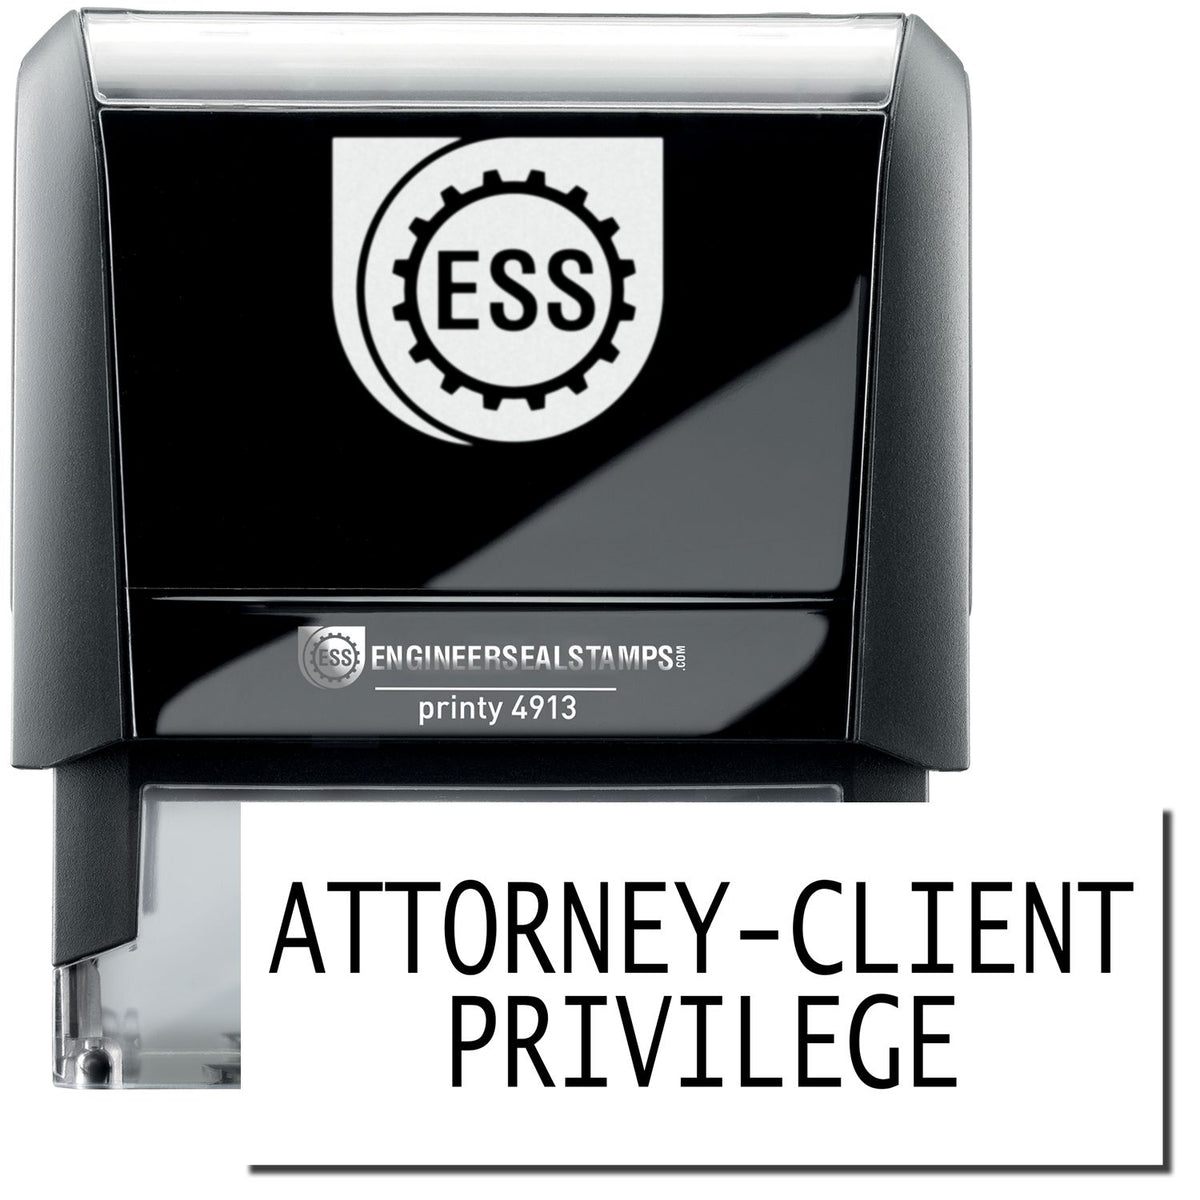 A self-inking stamp with a stamped image showing how the text &quot;ATTORNEY-CLIENT PRIVILEGE&quot; in a large bold font is displayed by it.